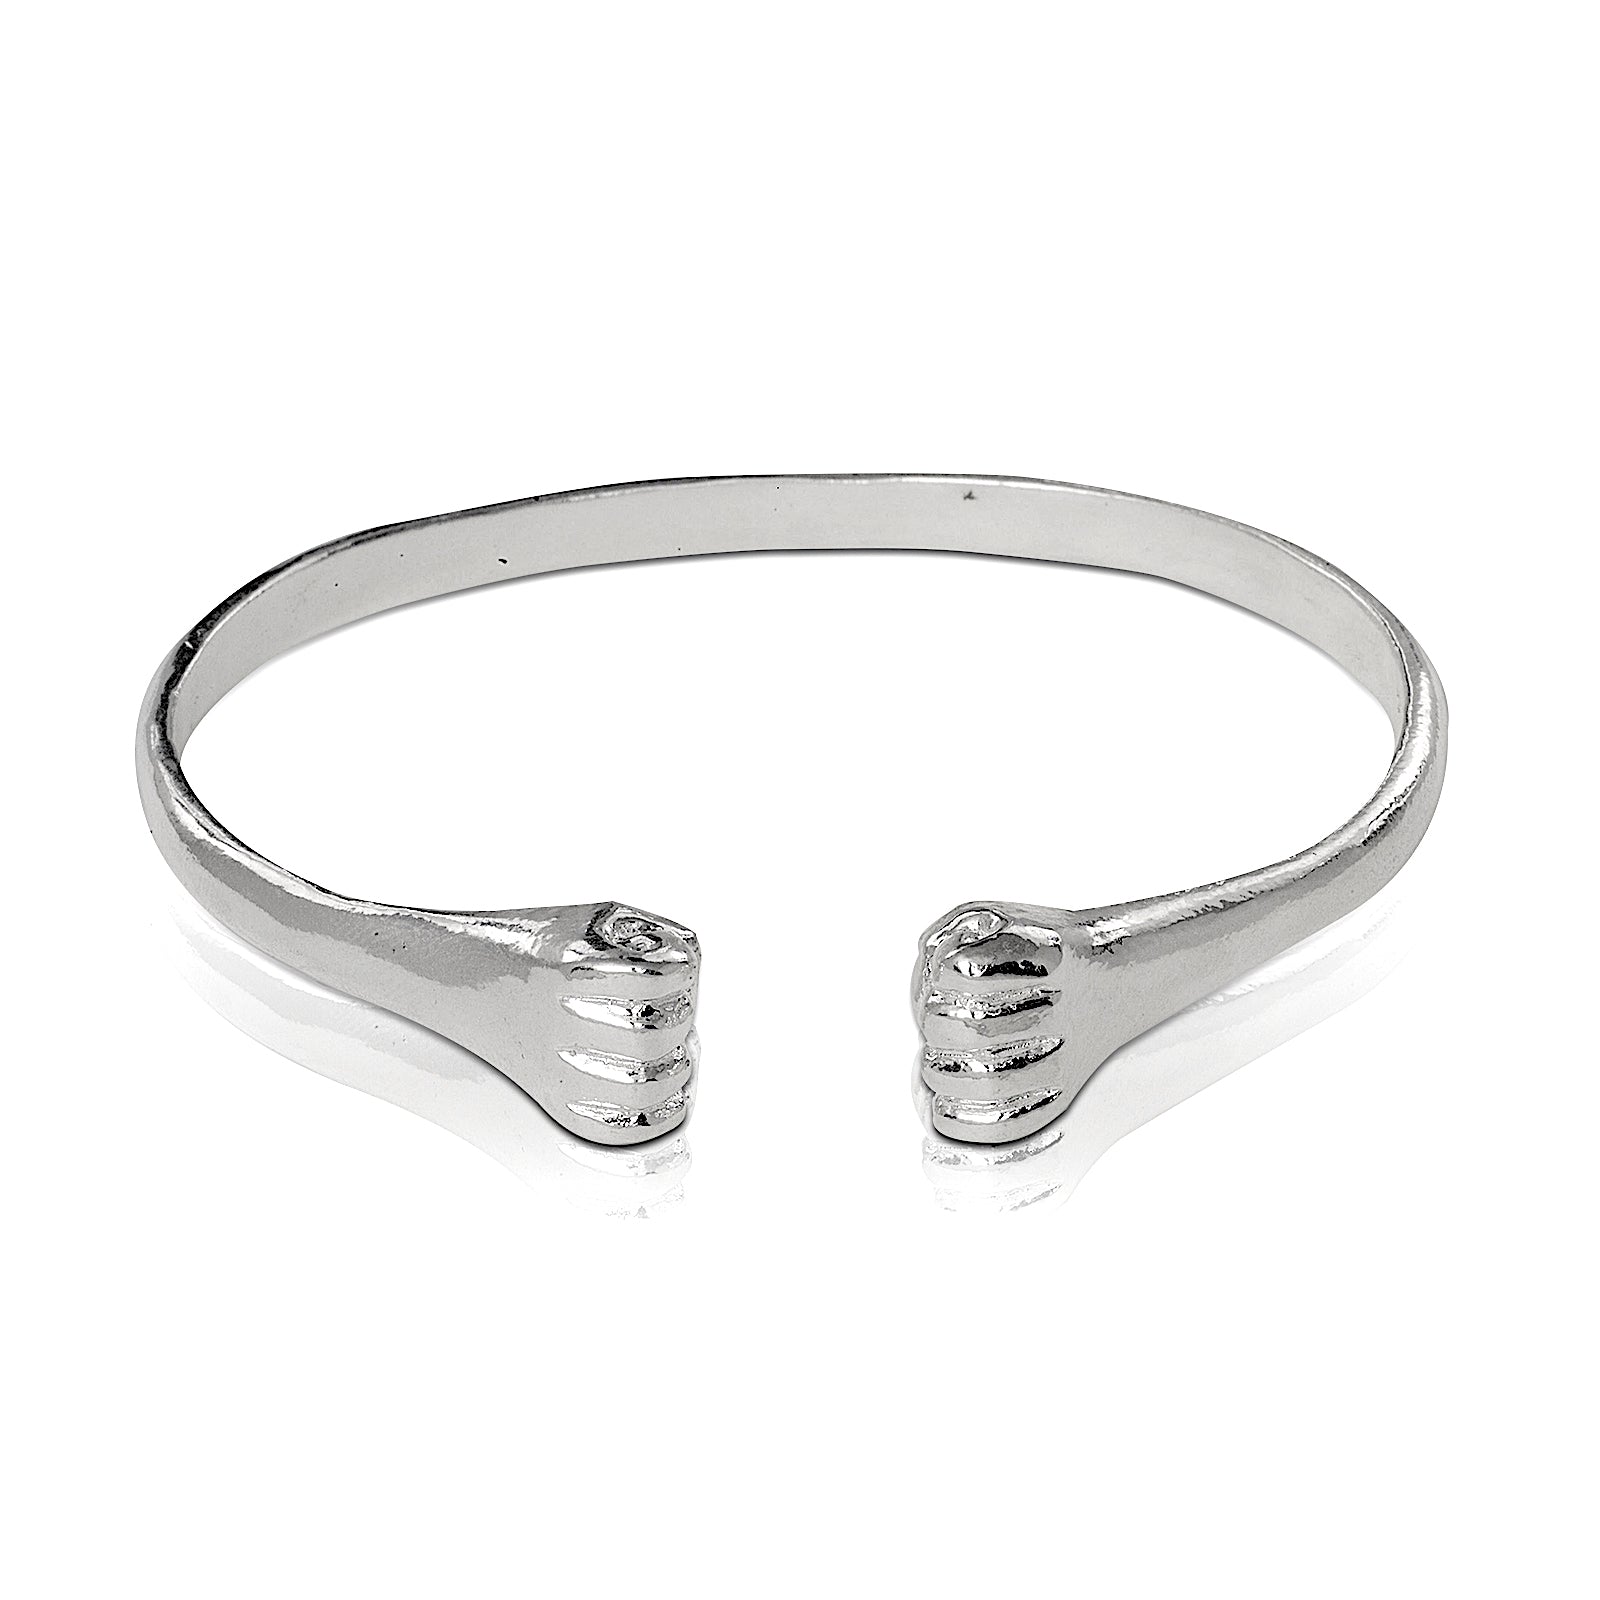 .925 Sterling Silver Flat Fists ends bangle - Betterjewelry